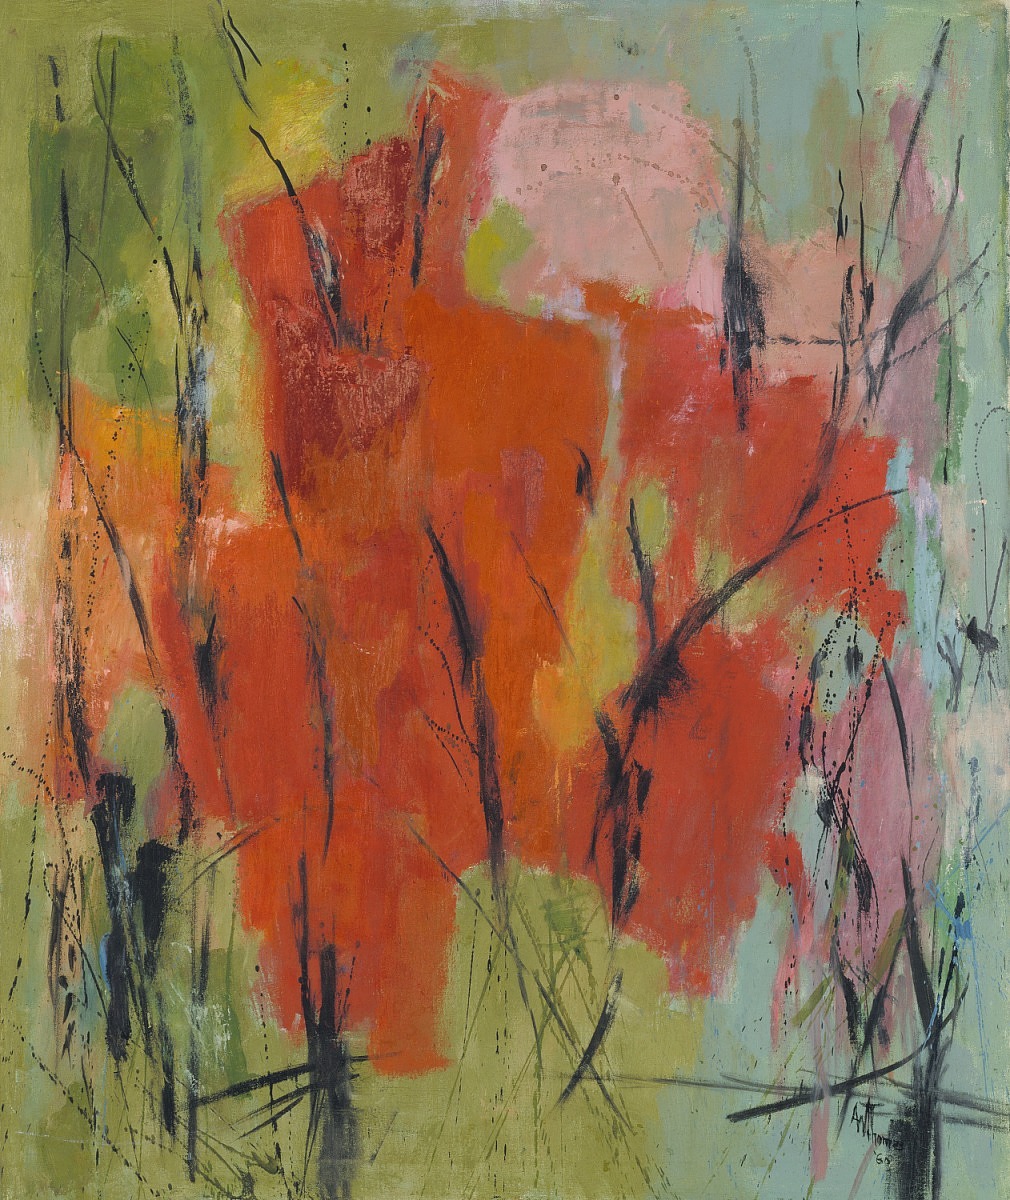 Red Abstraction. Composition primarily in red accented with thin black lines. Background in olive green. Rendered in oil on canvas, by Alma Thomas.